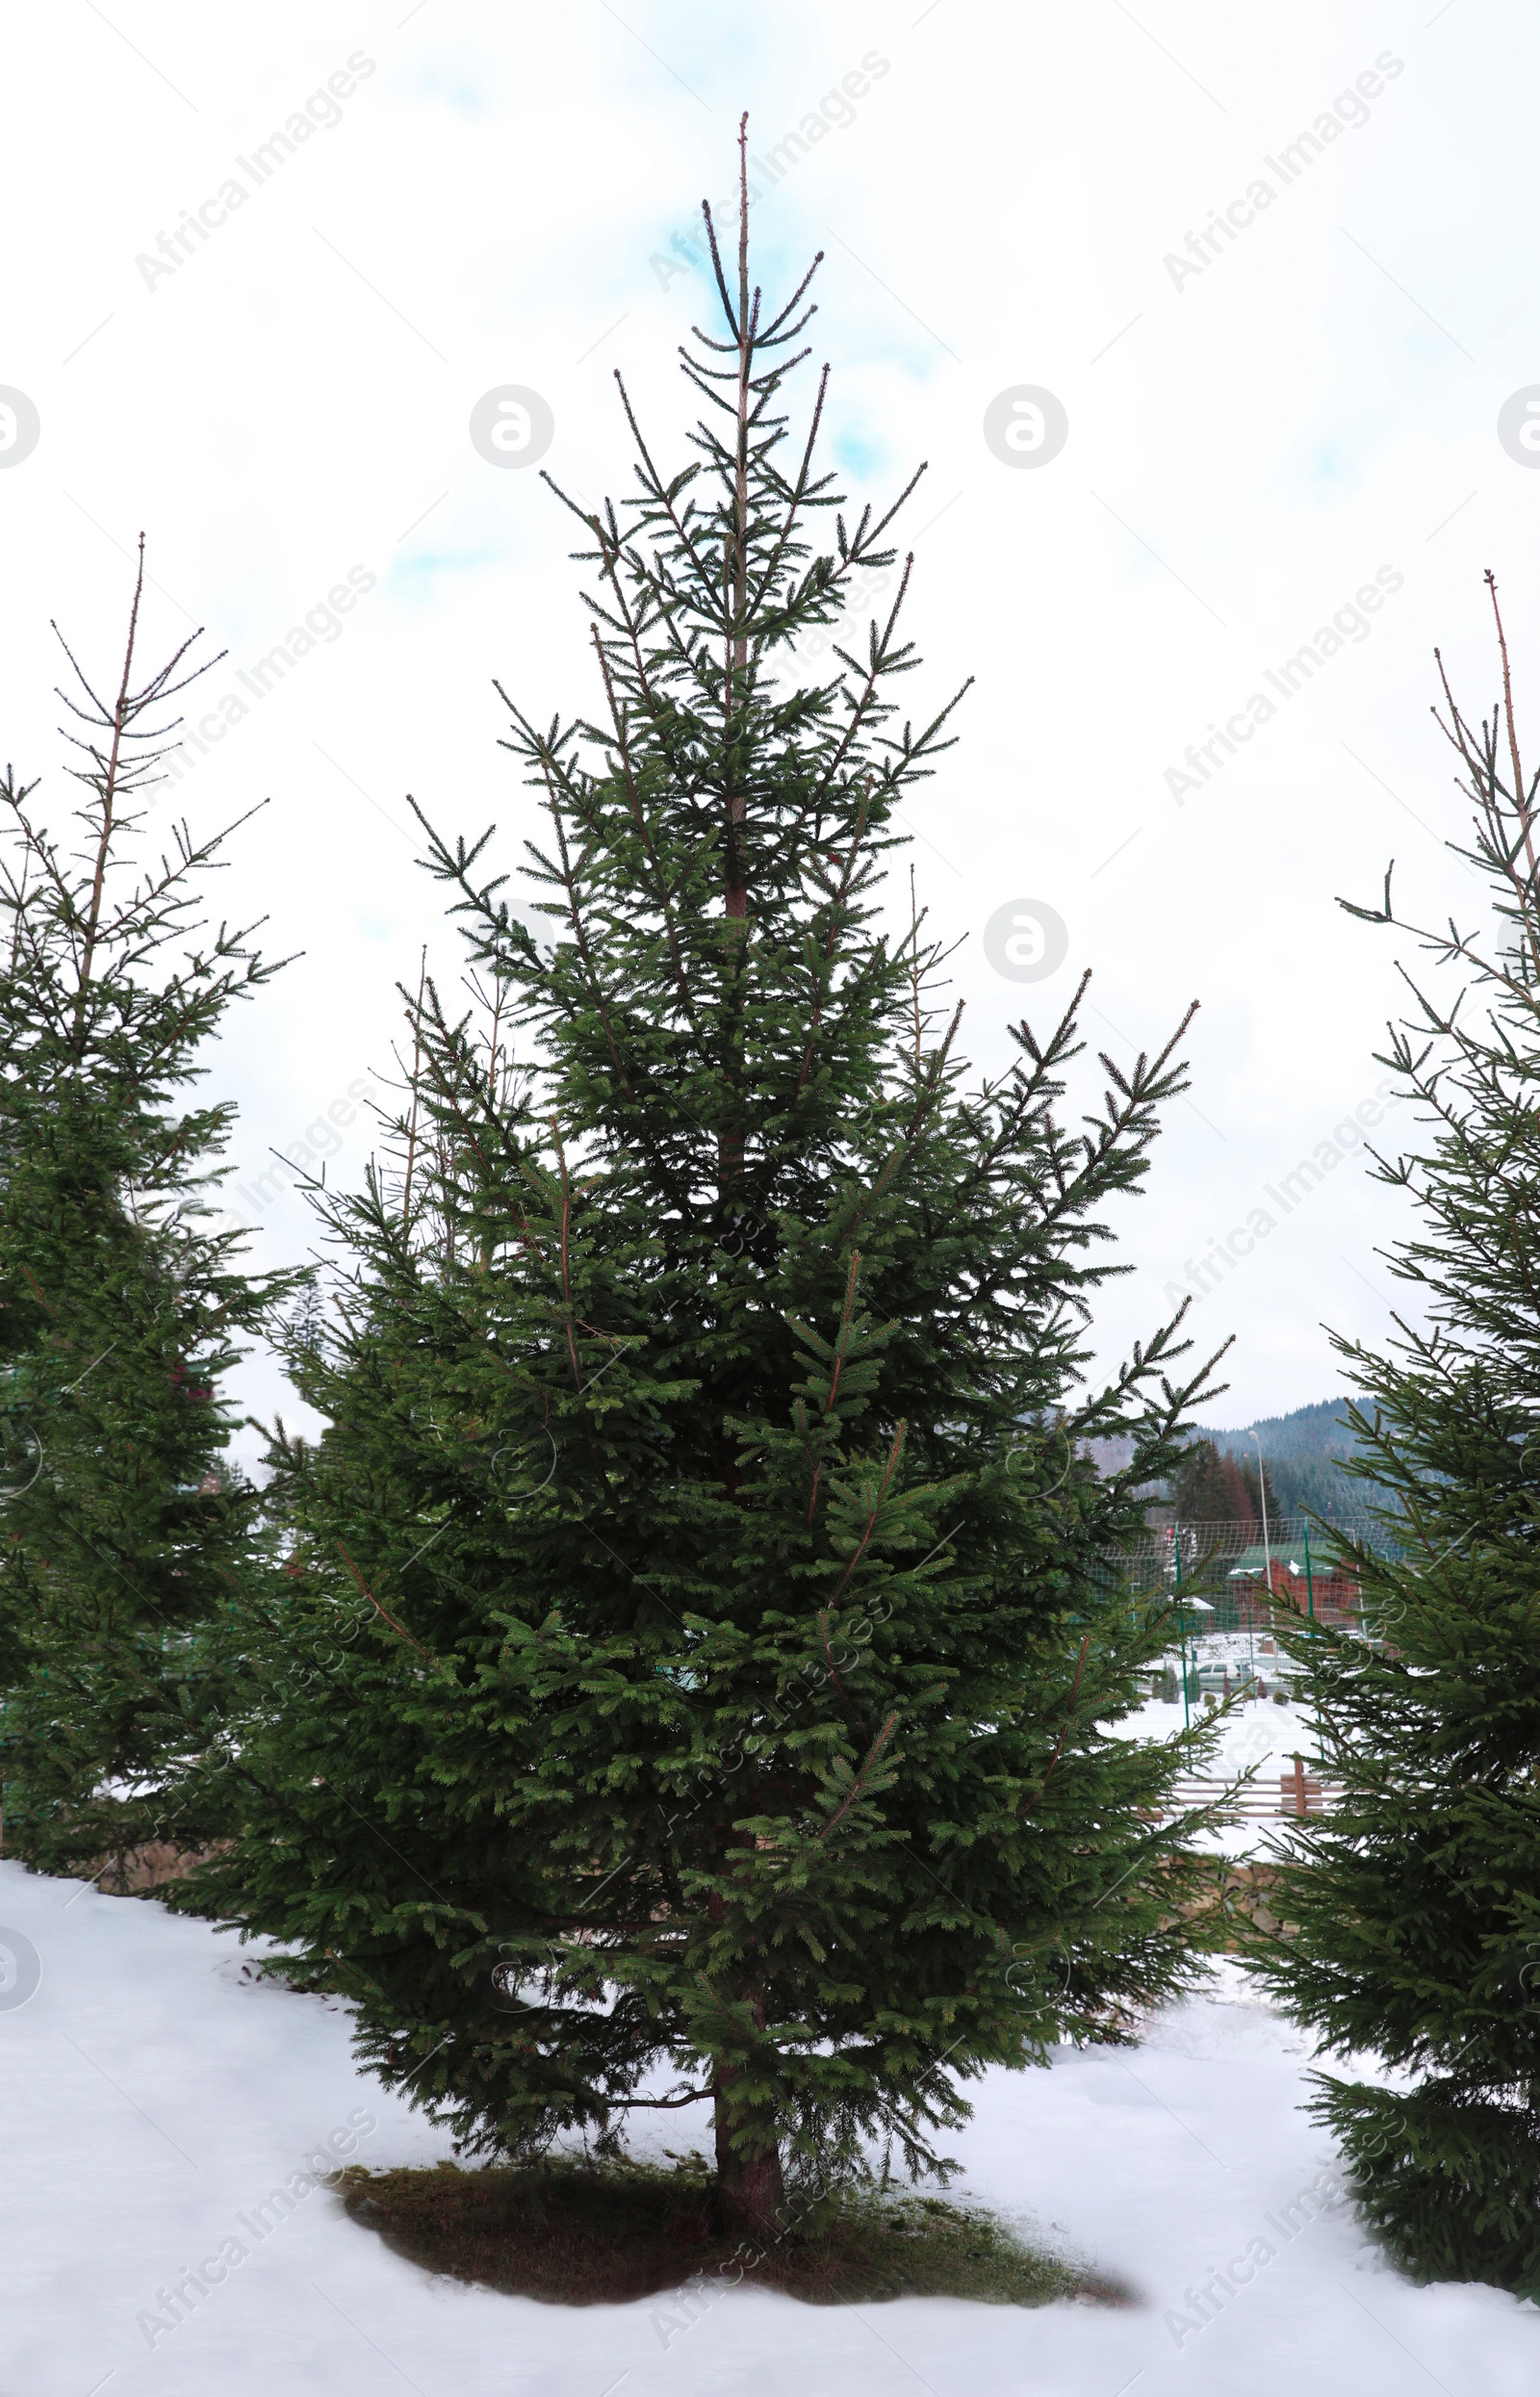 Photo of Fir tree and snow on ground outdoors